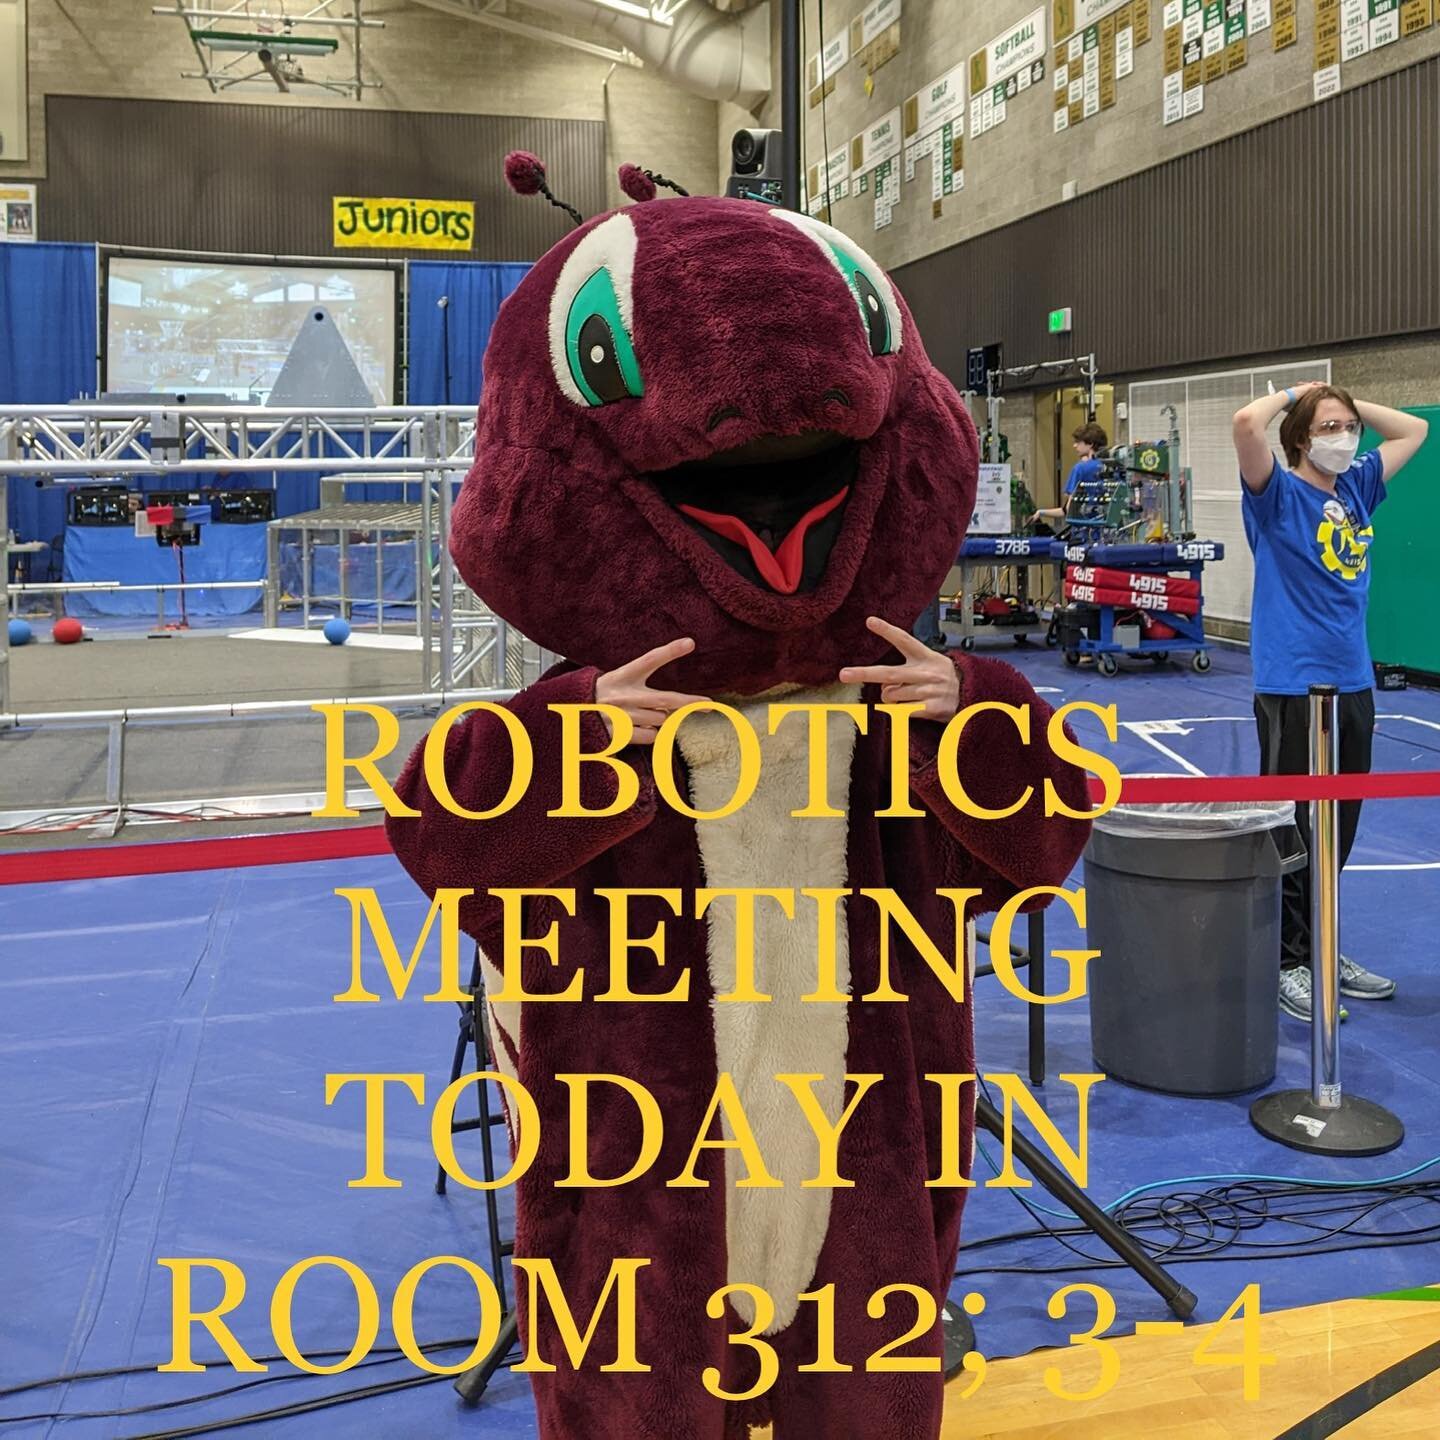 Robotics meeting is today from 3-4! If you want to join us in this journey come to room 312 and sign up!